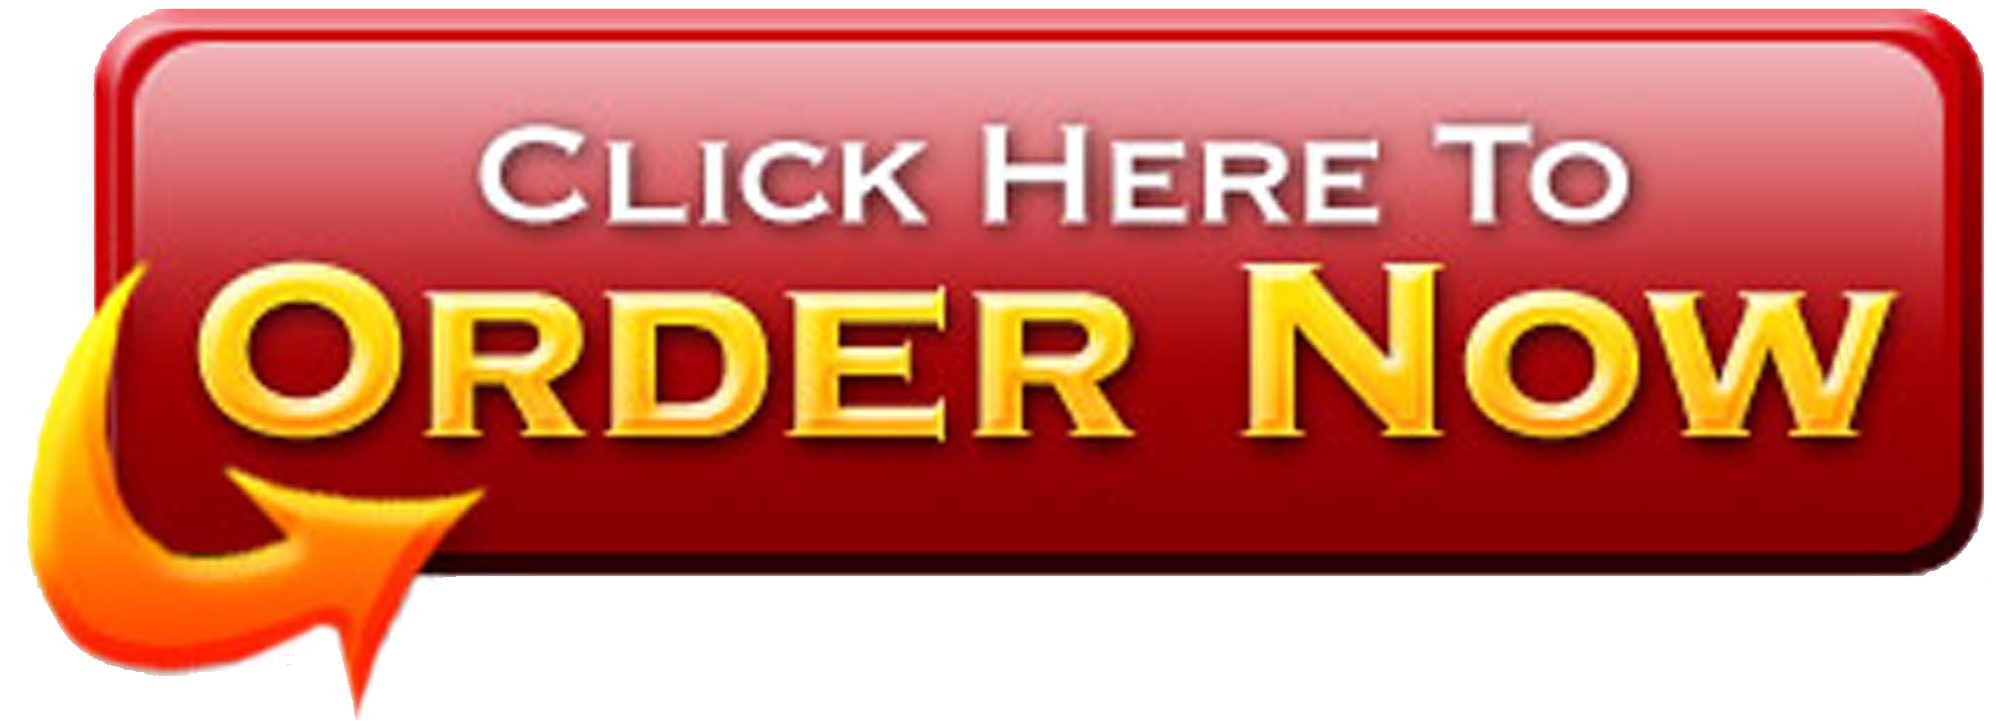 Order Now Button Flame Design PNG